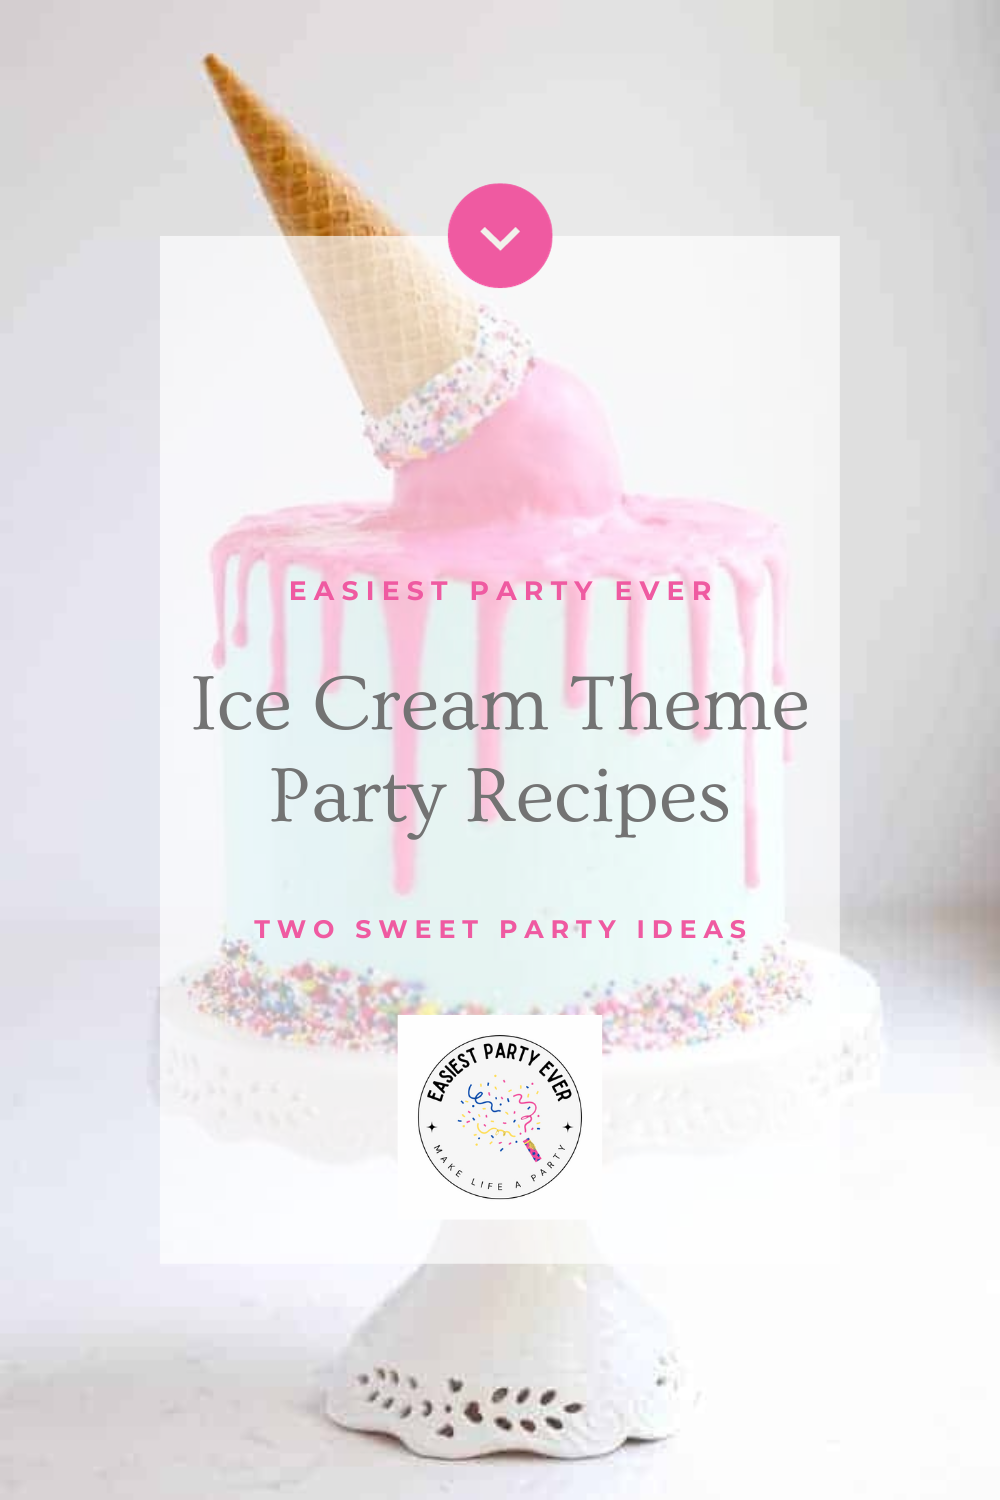 The 8 Best “Two Cool” Ice Cream Themed Party Recipes